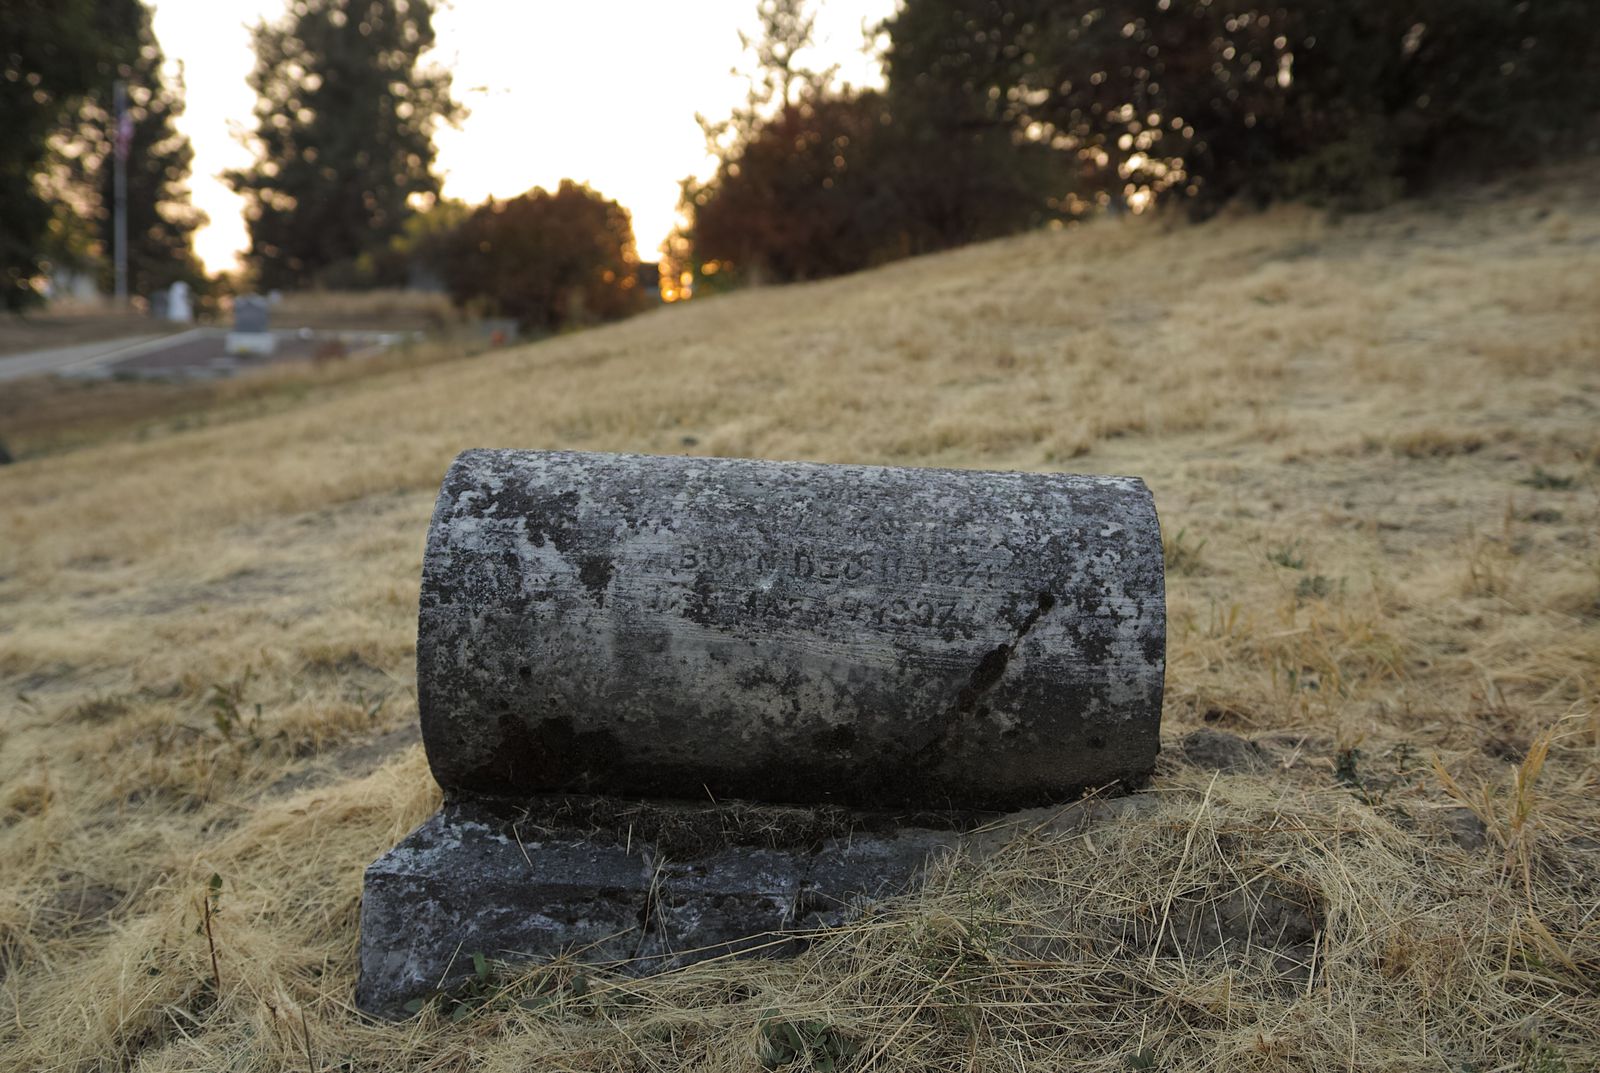 This headstone reminds me of a steamroller.